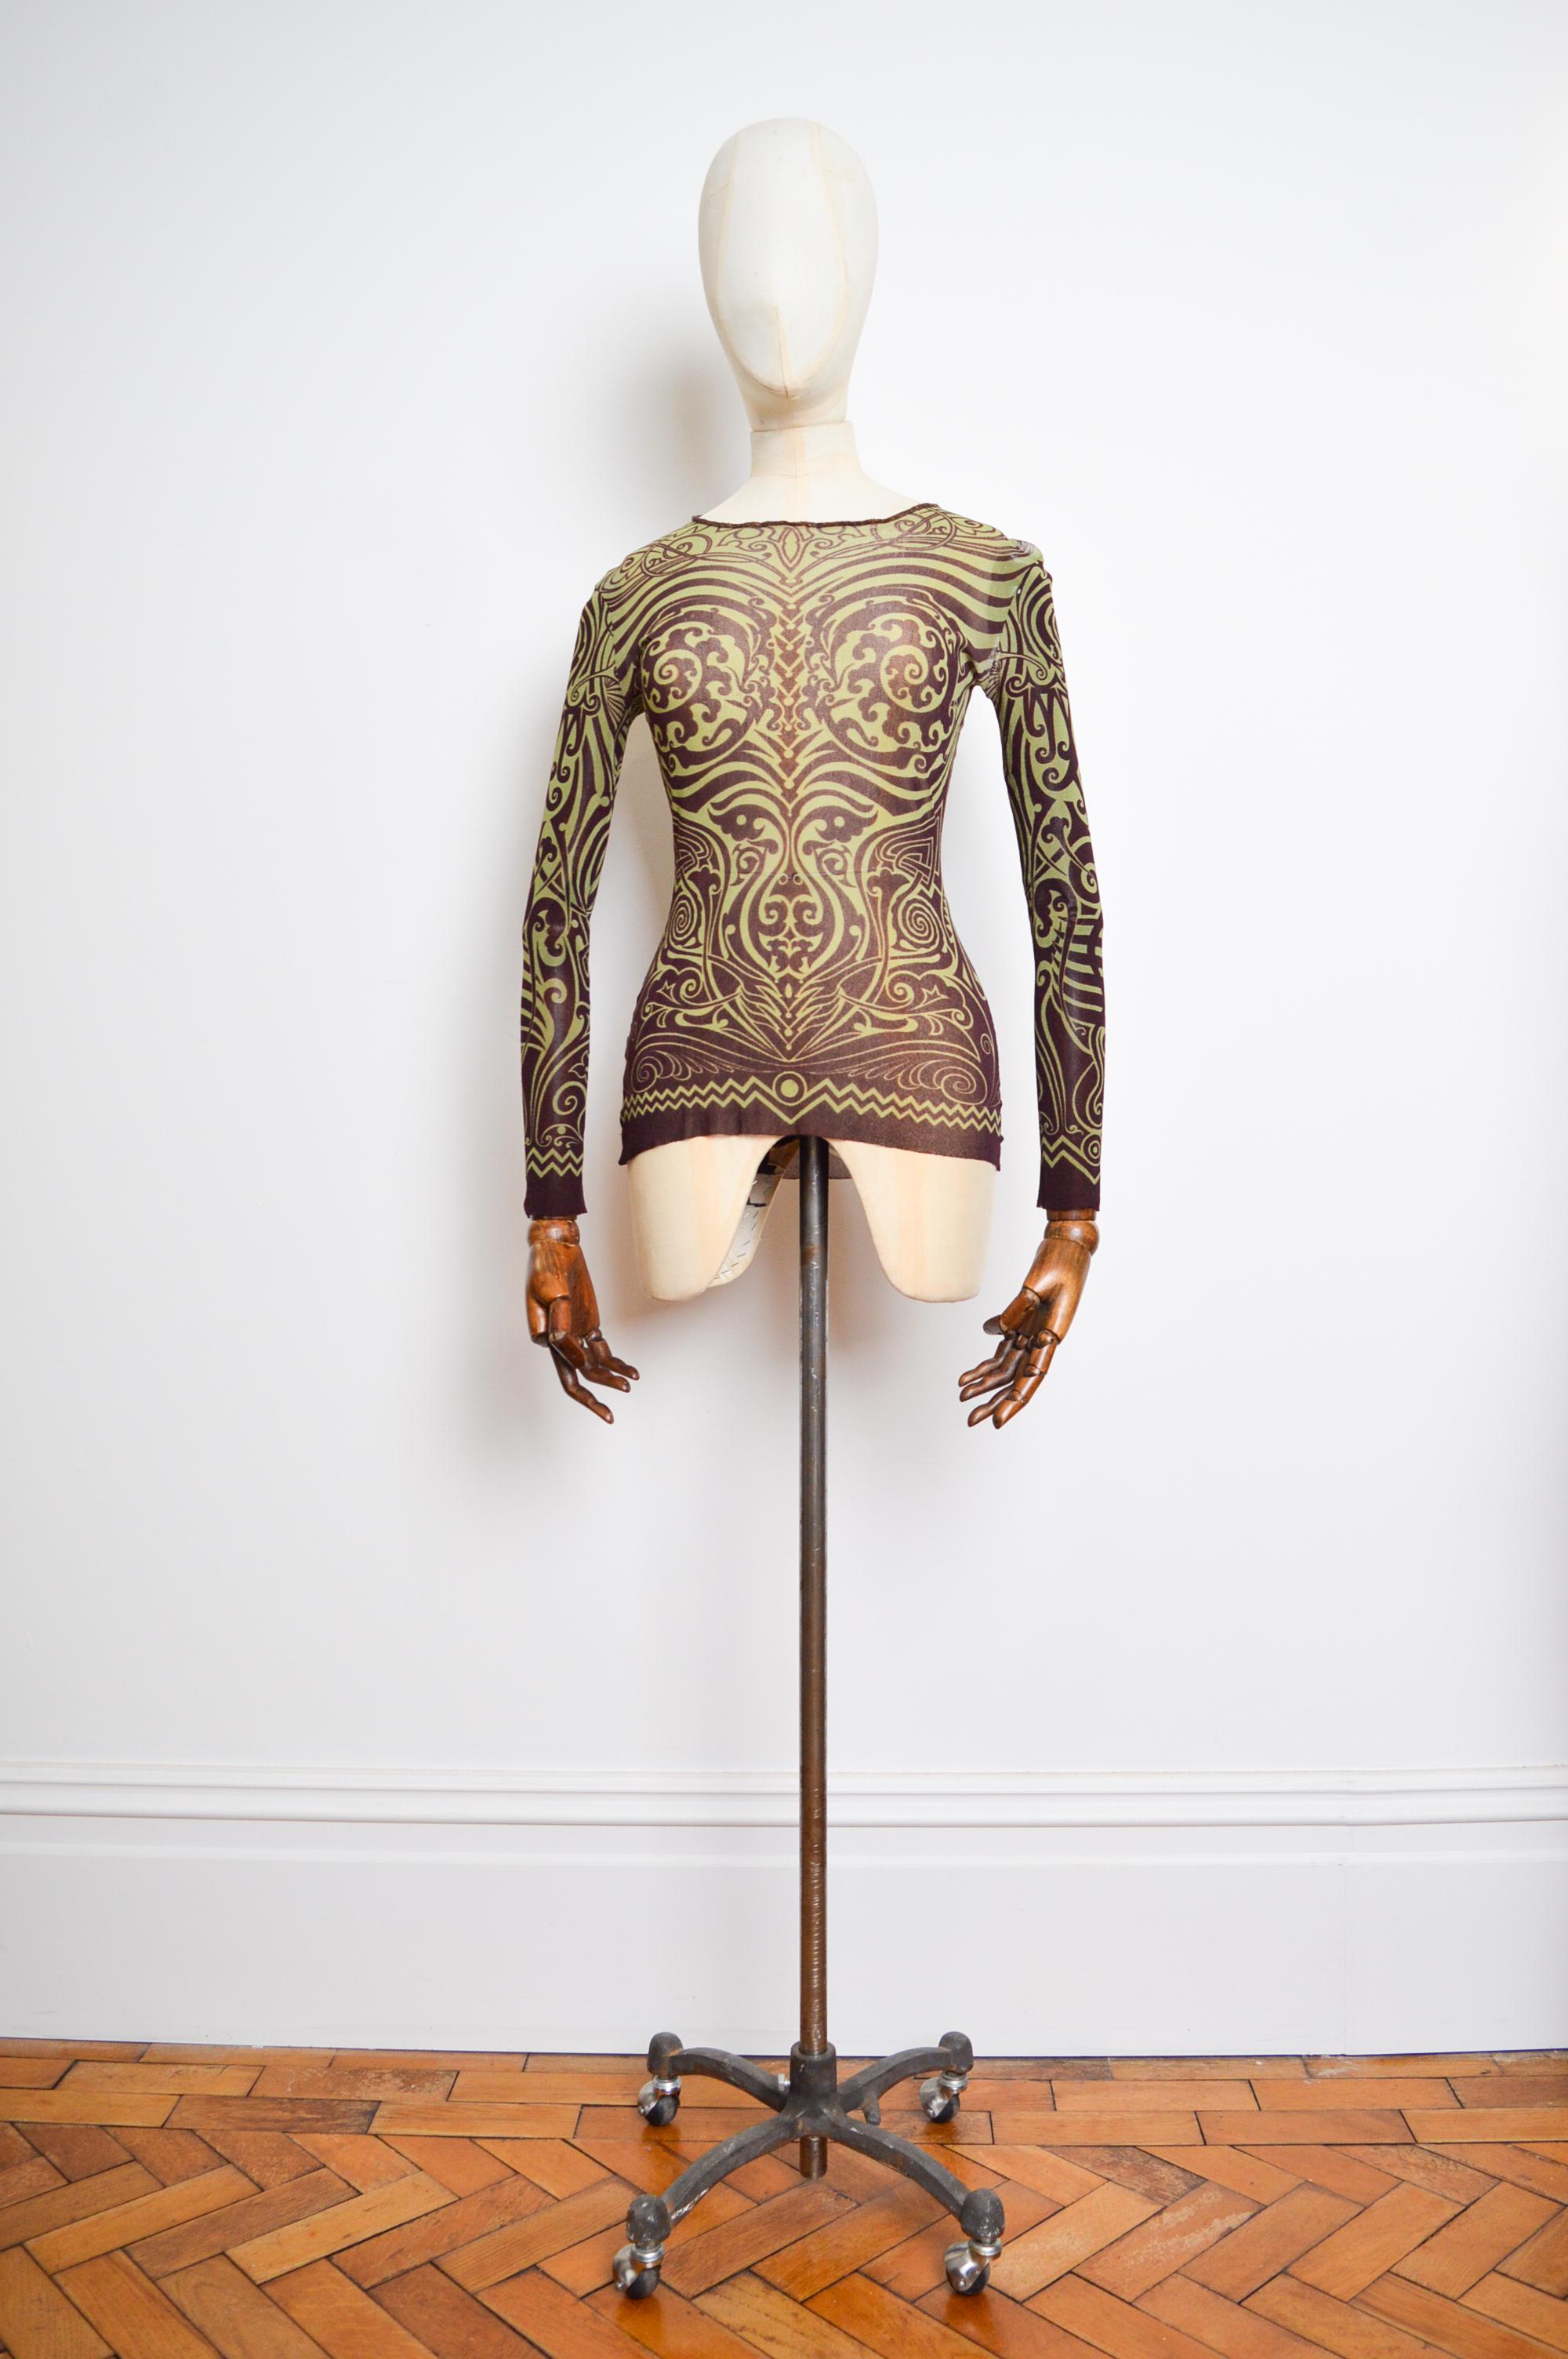 Spring / Summer 1996 Jean Paul Gaultier 'Tribal Tattoo' mesh long sleeve Top. (as seen on the runway modelled by Linda Evangelista)

MADE IN ITALY.  

Measurement are provided in Inches ;
(Stretchy - Laid flat vs Stretched)
Pit to pit - 15.5